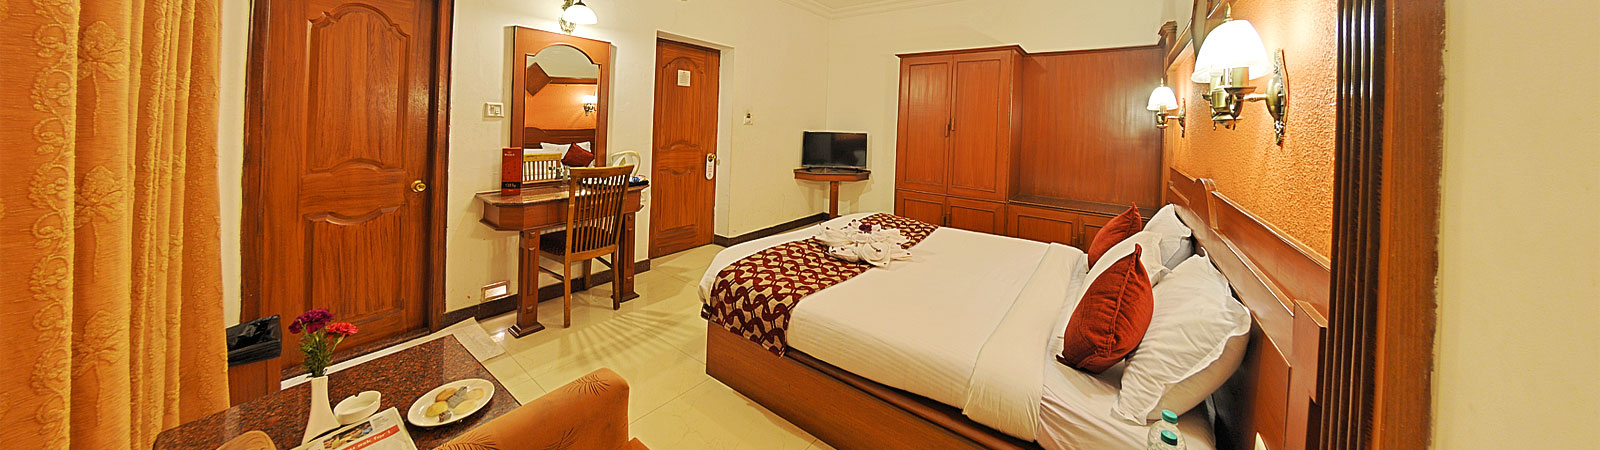 No1 hotels in ooty